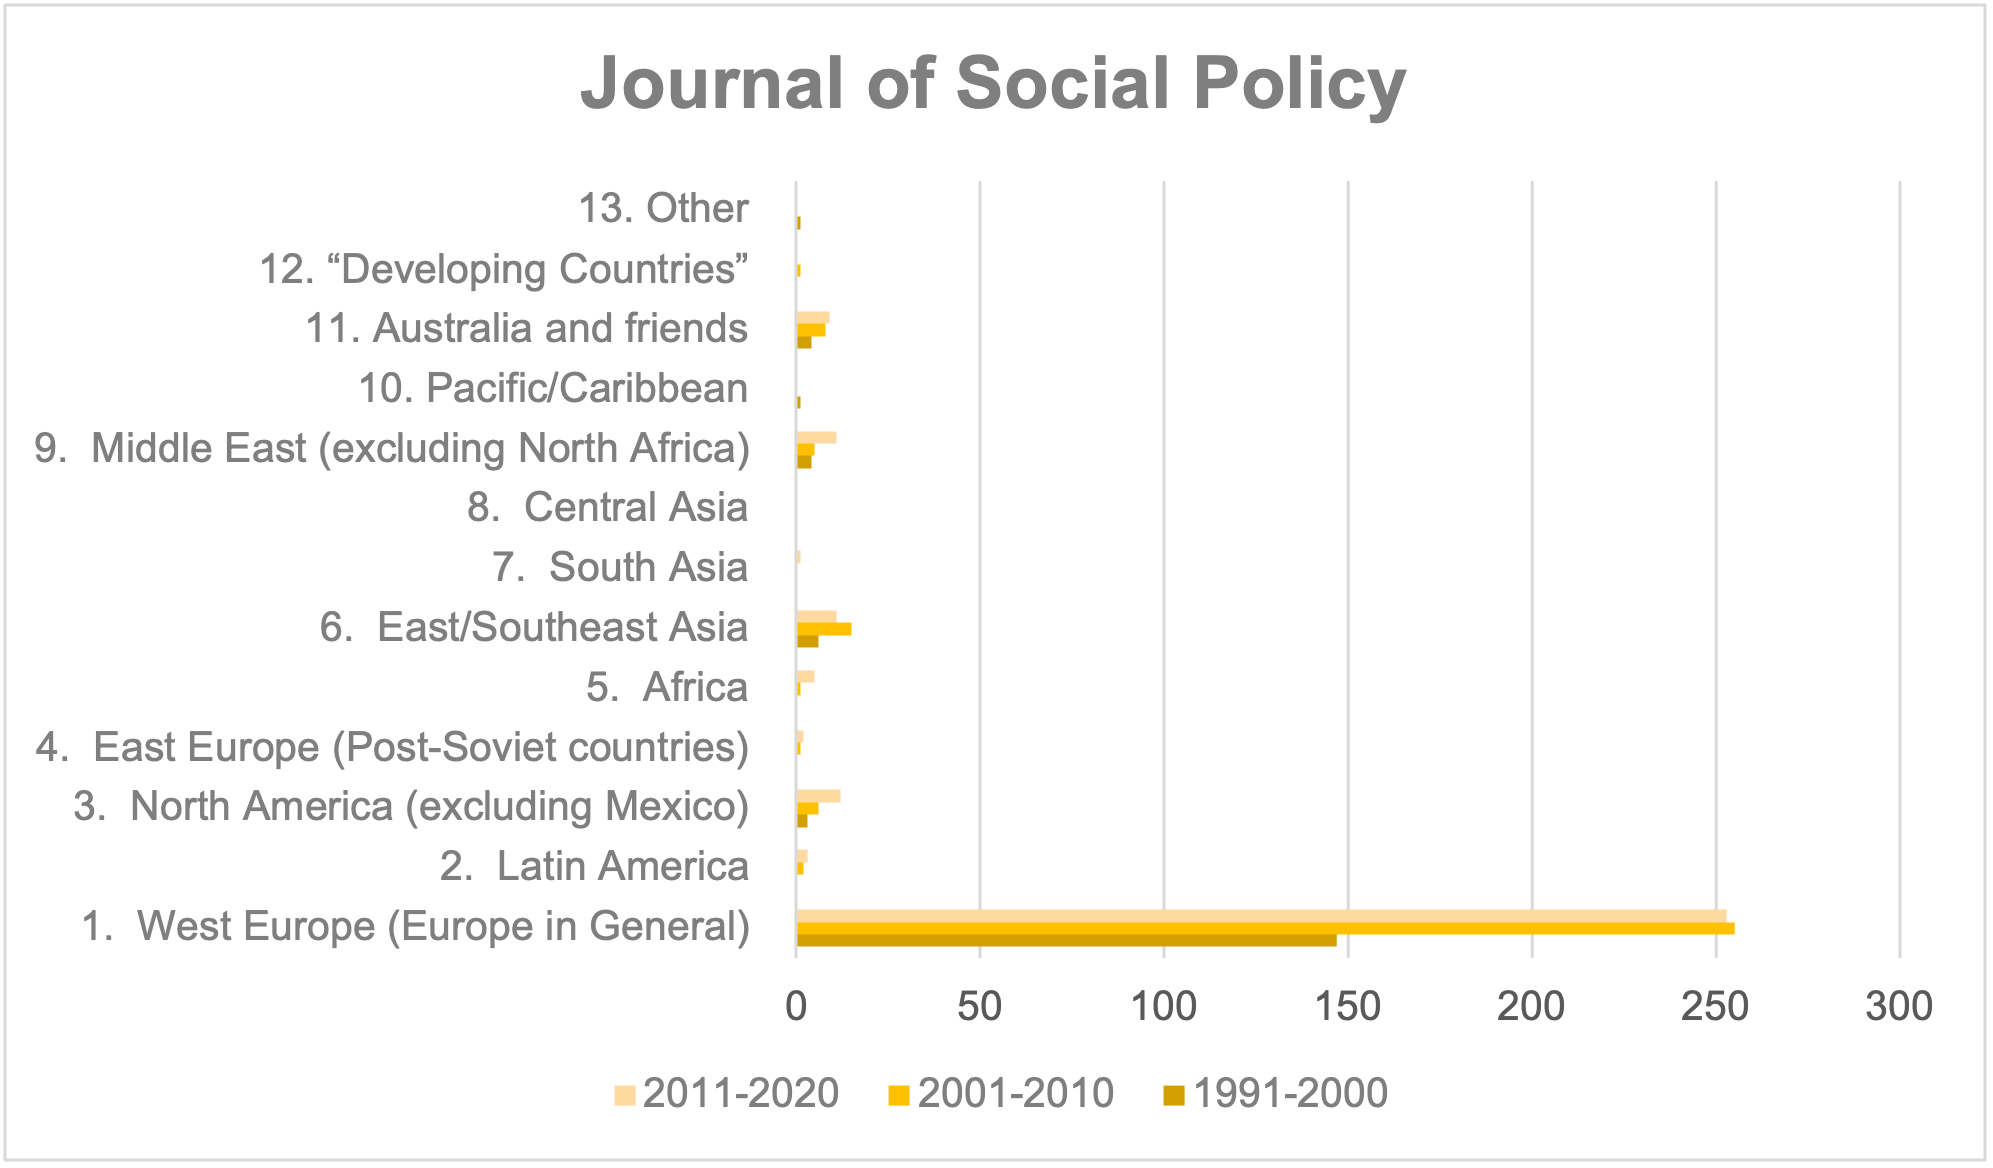 World region references of articles in the Journal of Social Policy, 1990s to 2010s